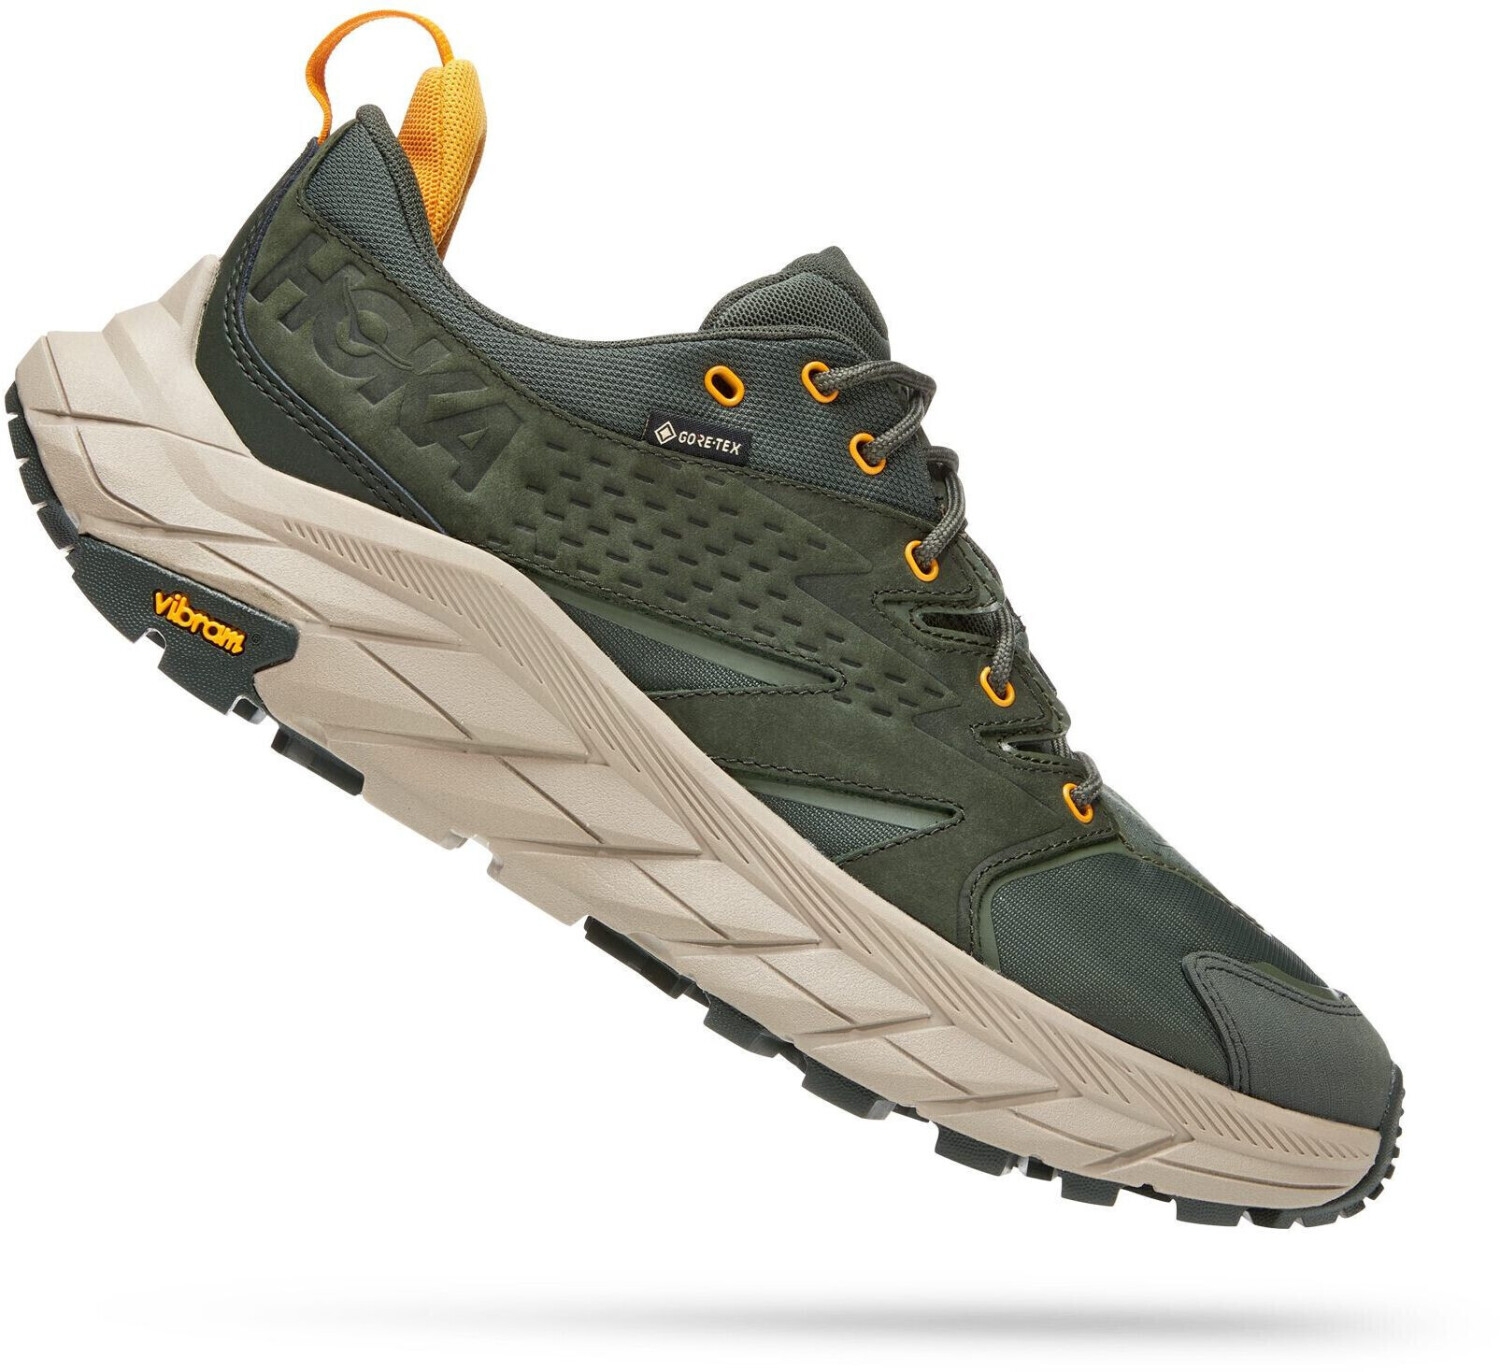 Buy Hoka Anacapa Low Gore-Tex olive from £88.17 (Today) – Best Deals on ...